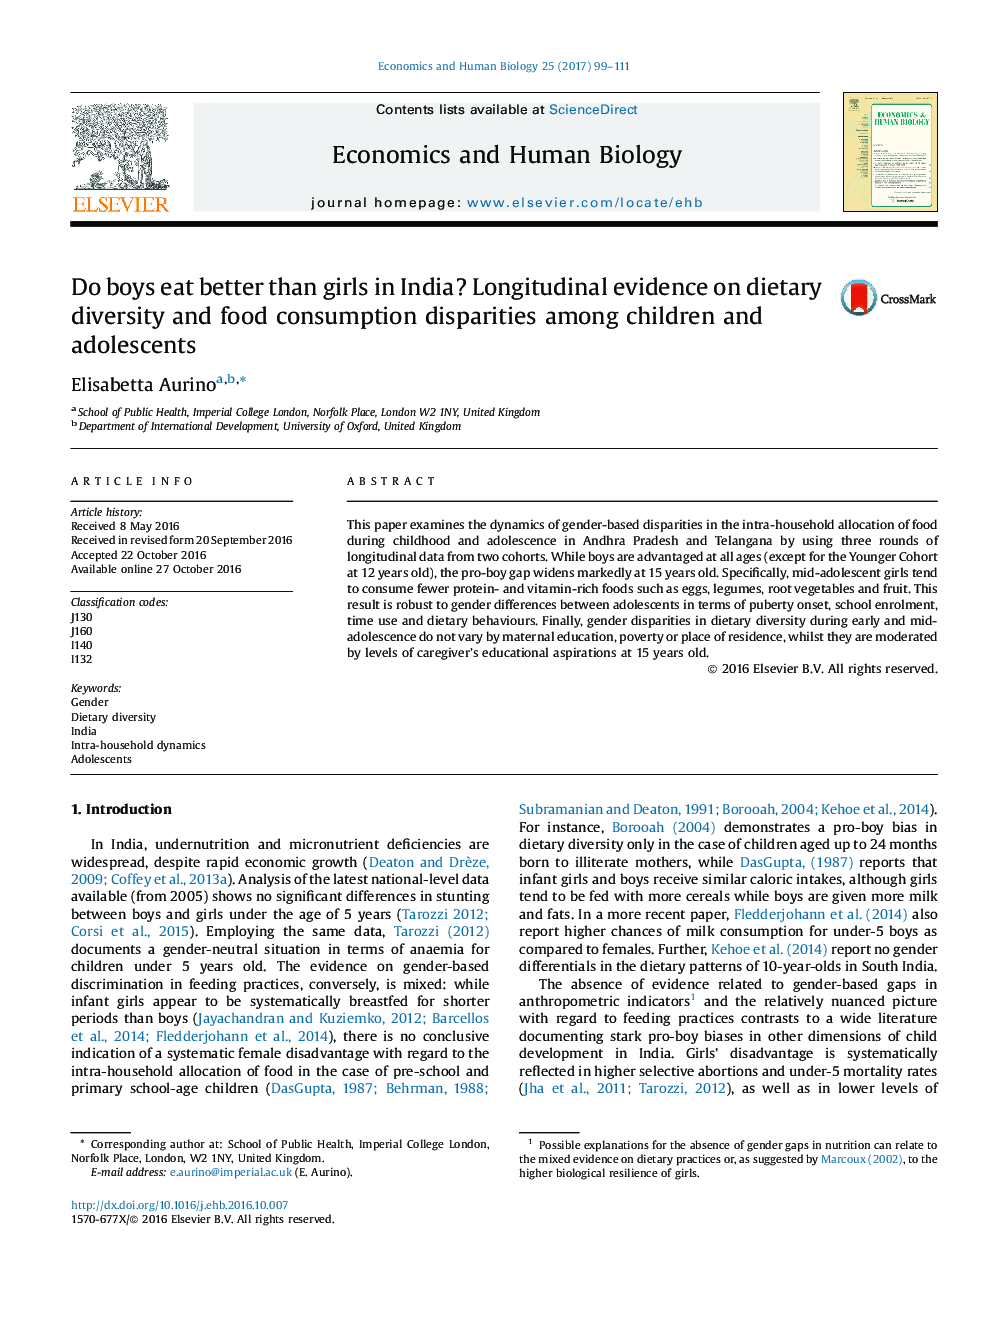 Do boys eat better than girls in India? Longitudinal evidence on dietary diversity and food consumption disparities among children and adolescents